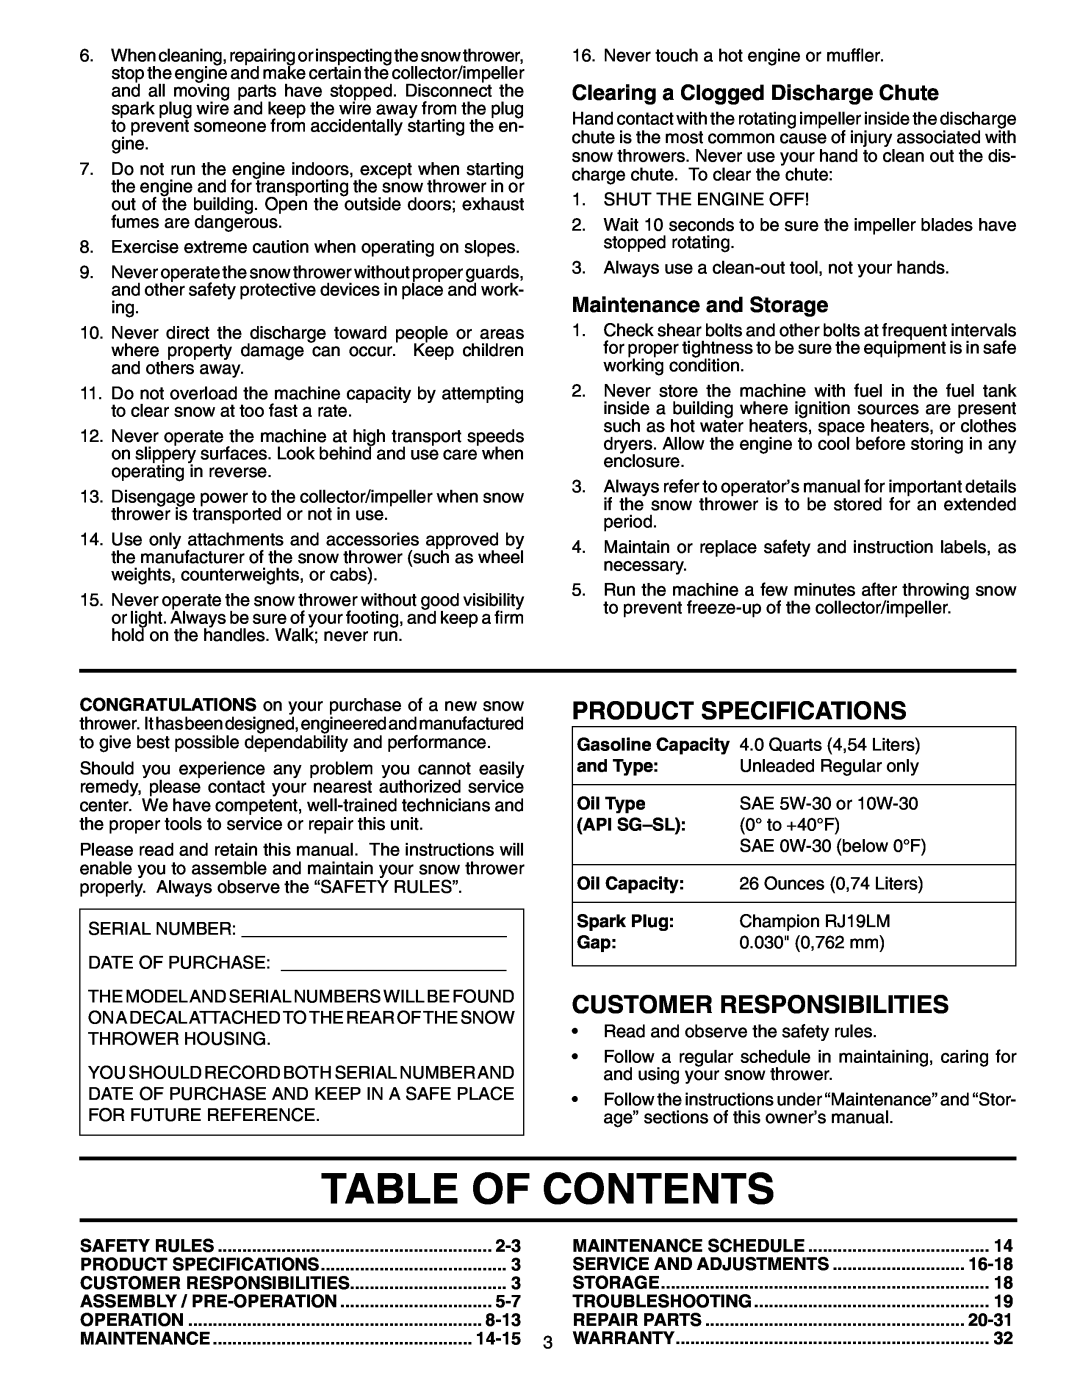 Poulan 961970004 Table Of Contents, Clearing a Clogged Discharge Chute, Maintenance and Storage, Product Specifications 